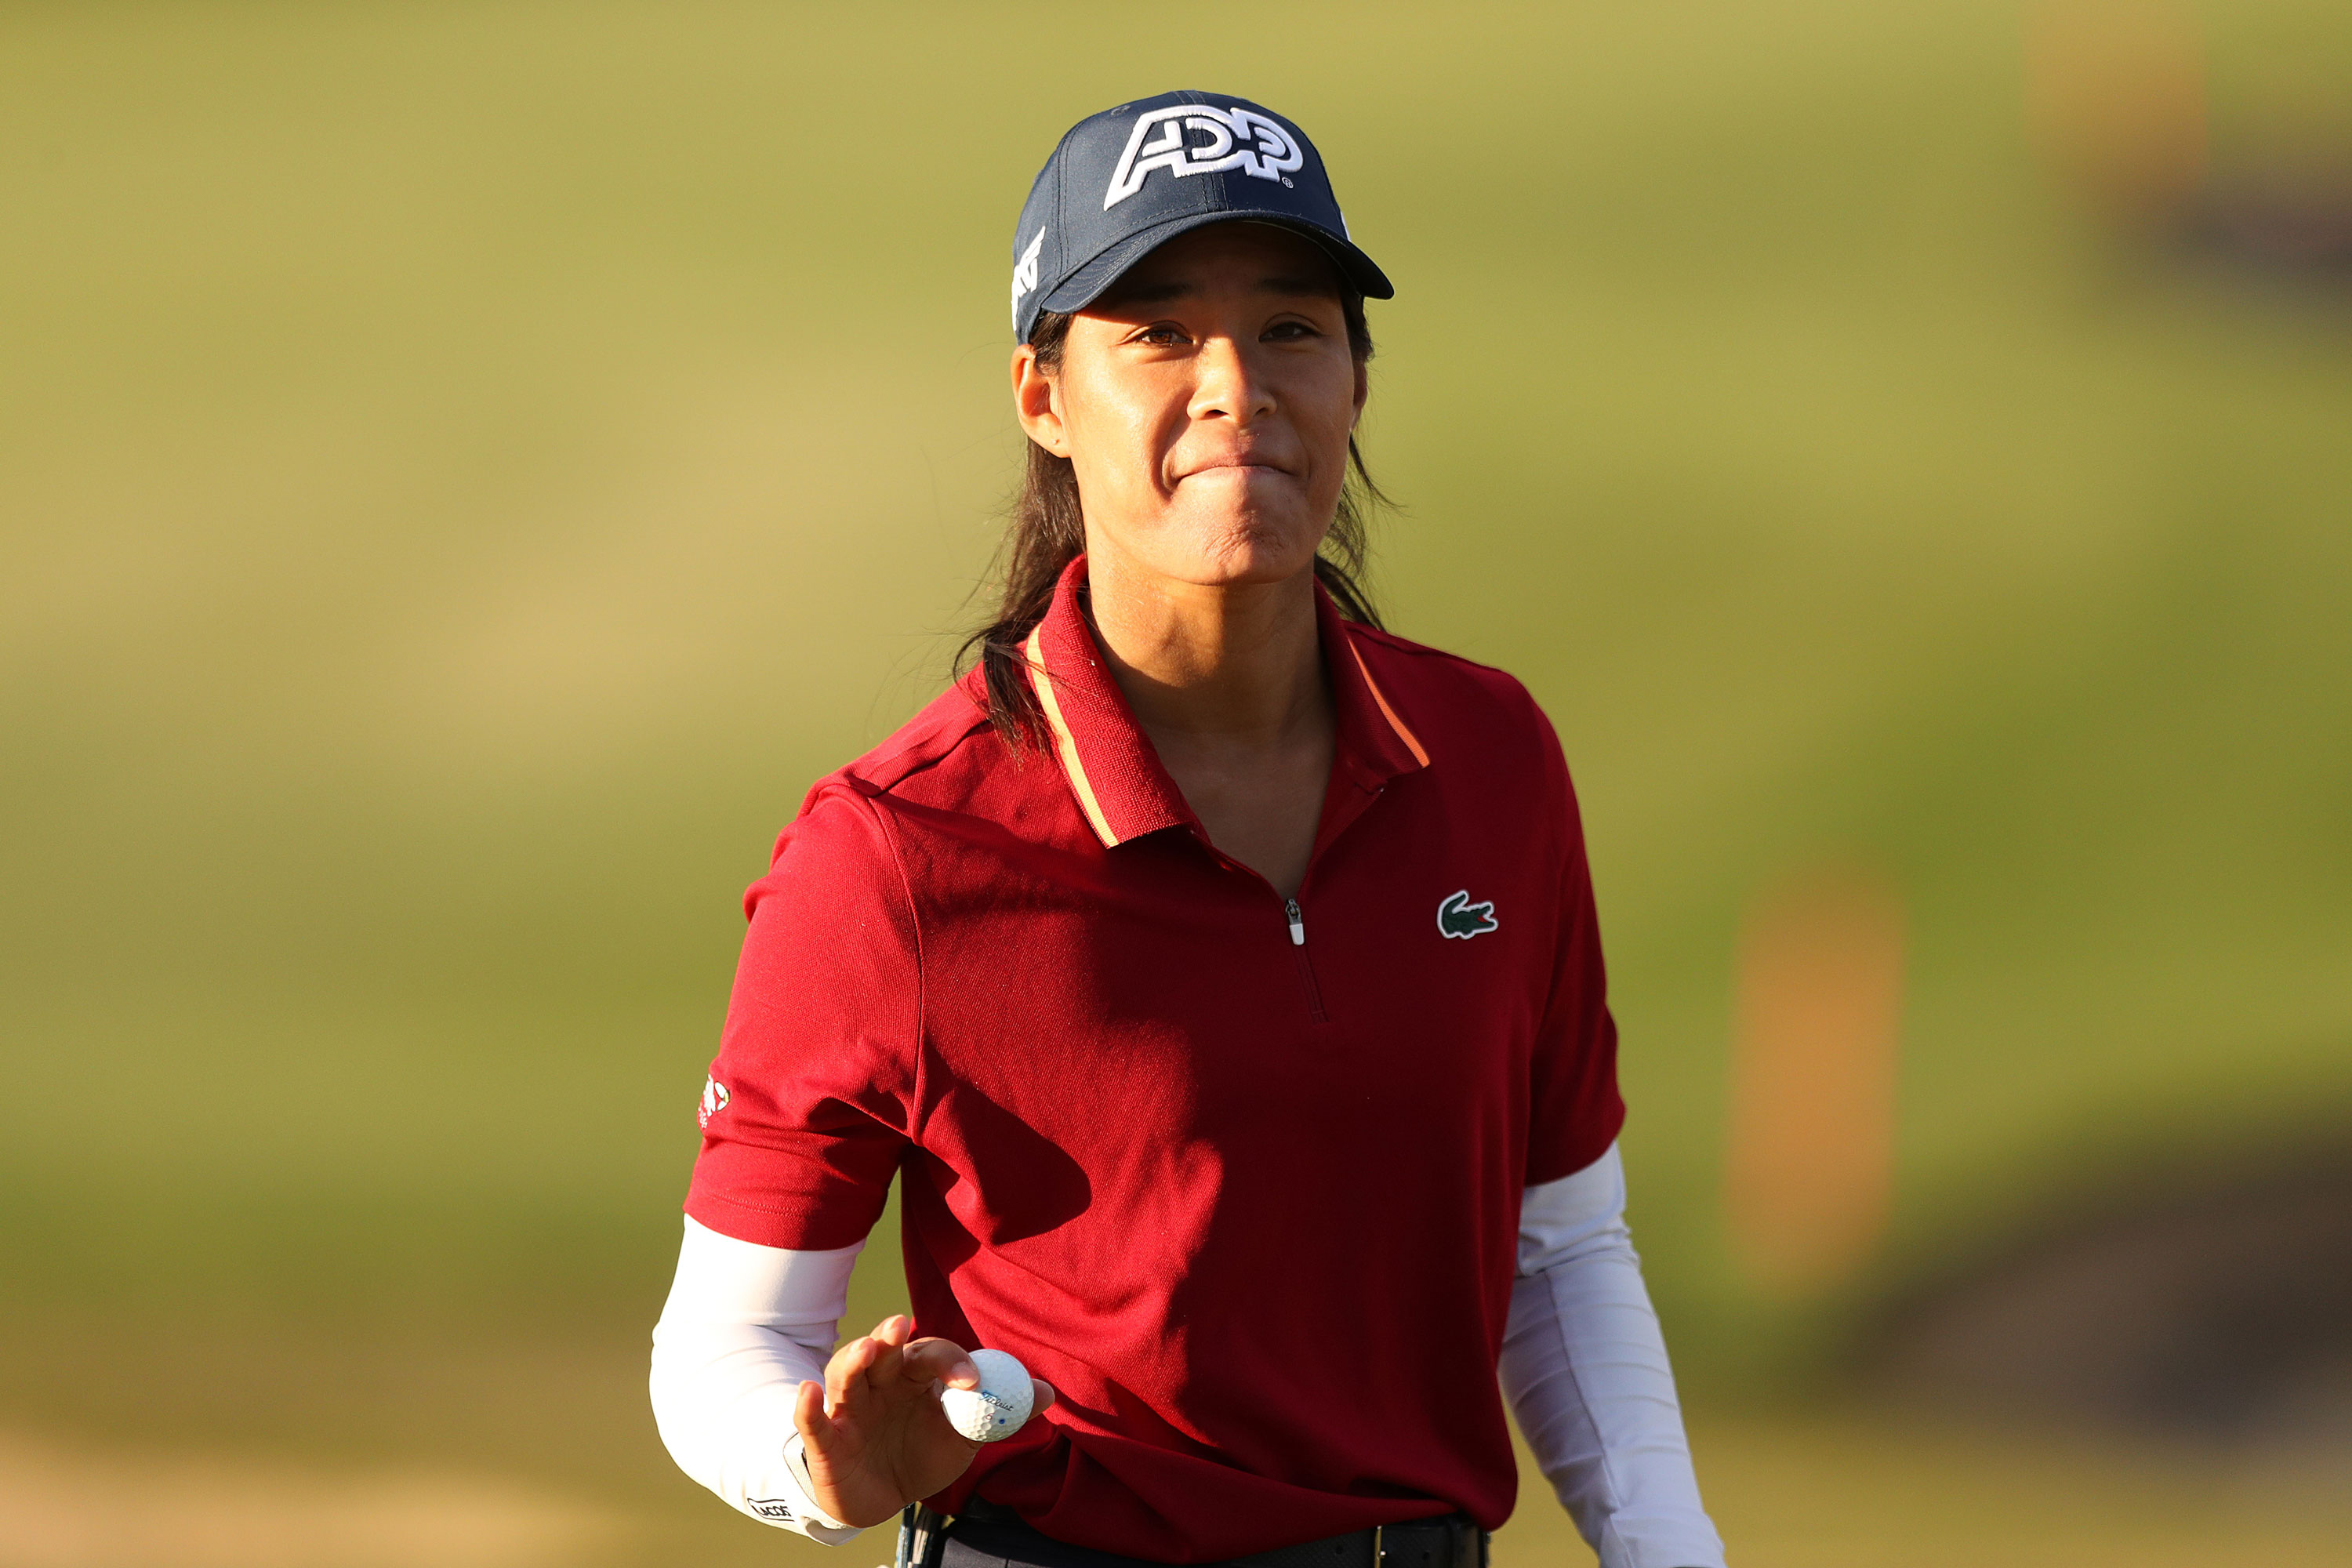 Celine Boutier, France's greatest LPGA player, wins Maybank Championship in  epic nine-hole(!) playoff, Golf News and Tour Information